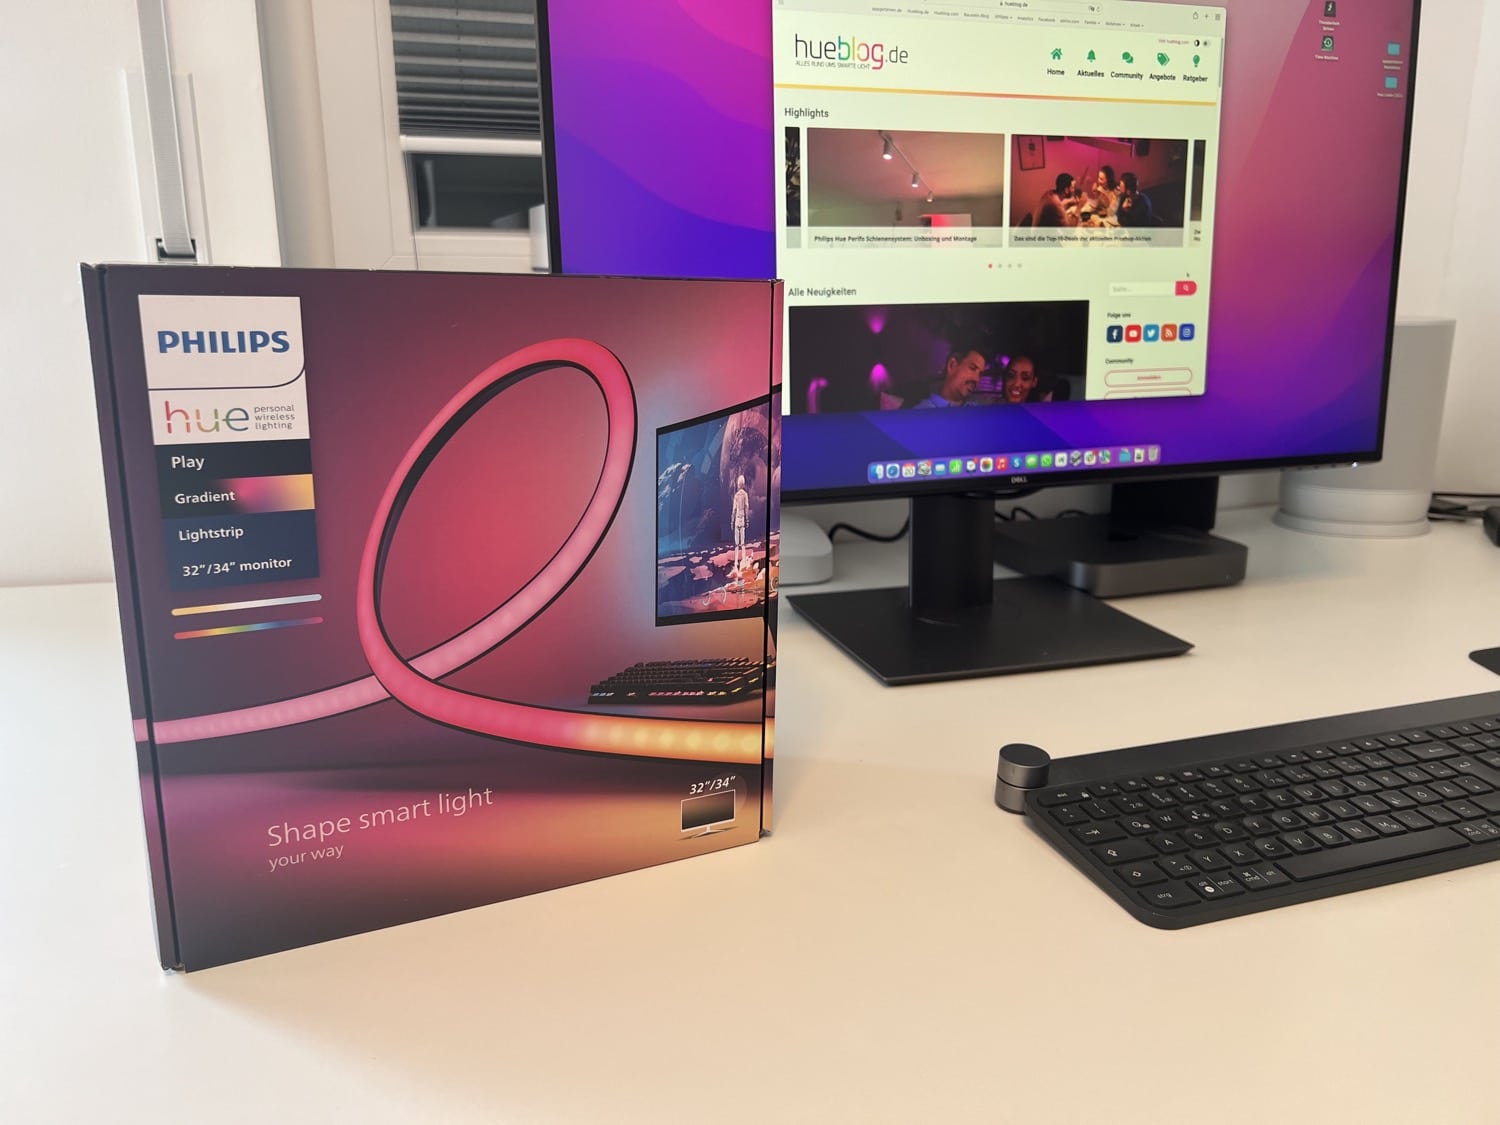 Hueblog: Philips Hue Play Gradient Lightstrip for PC in review